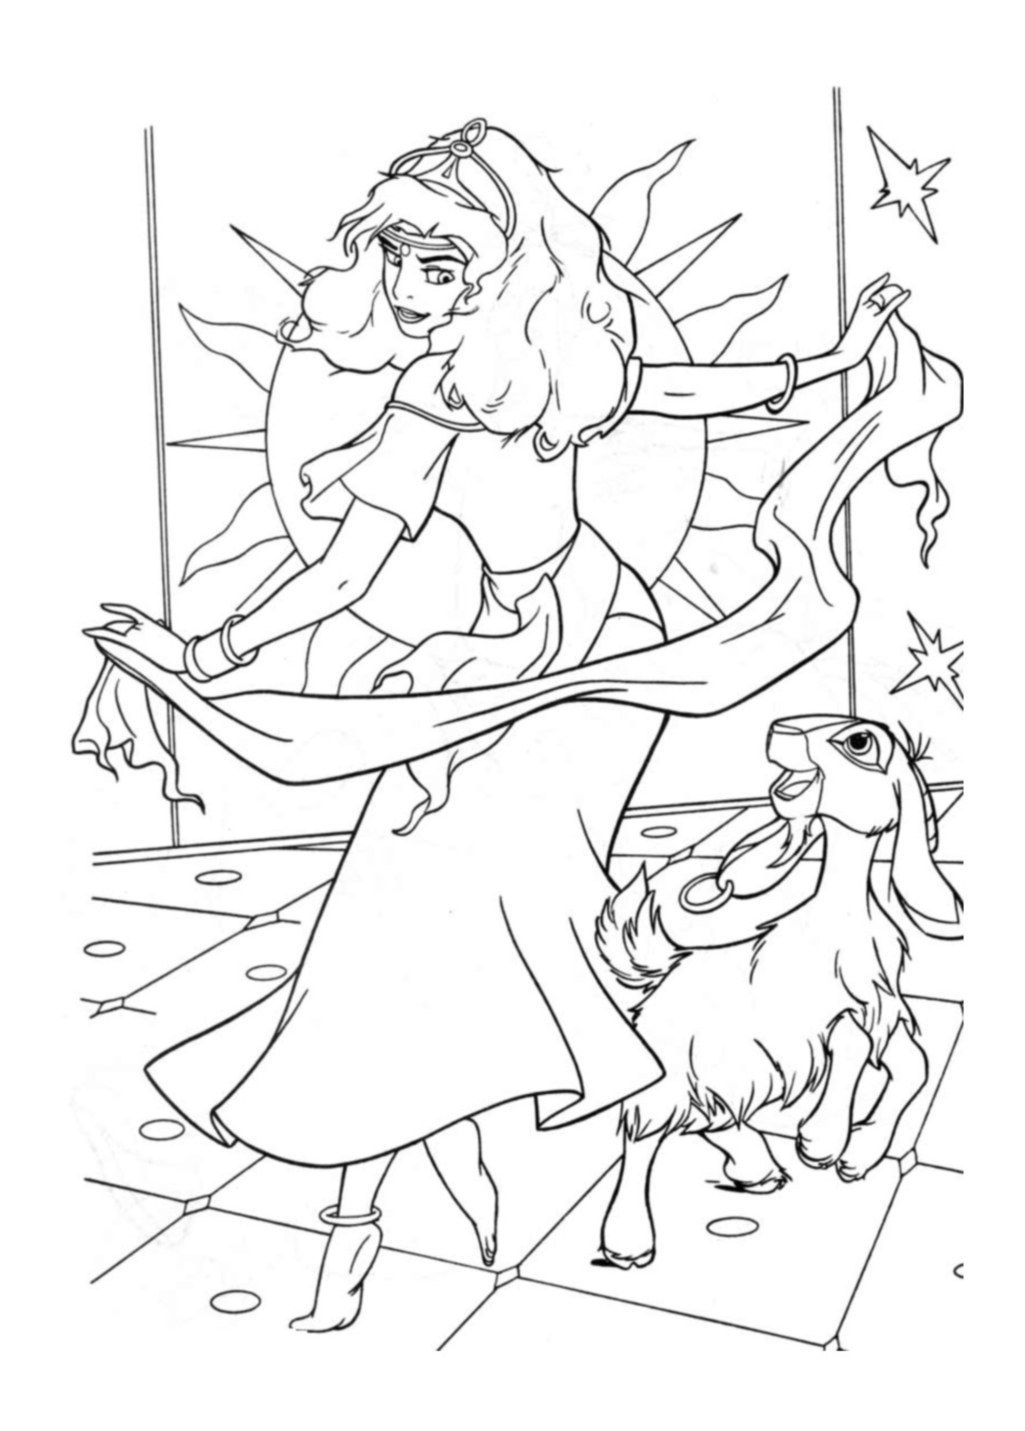 The hunchback of notre dame coloring pages - Coloring for kids ...